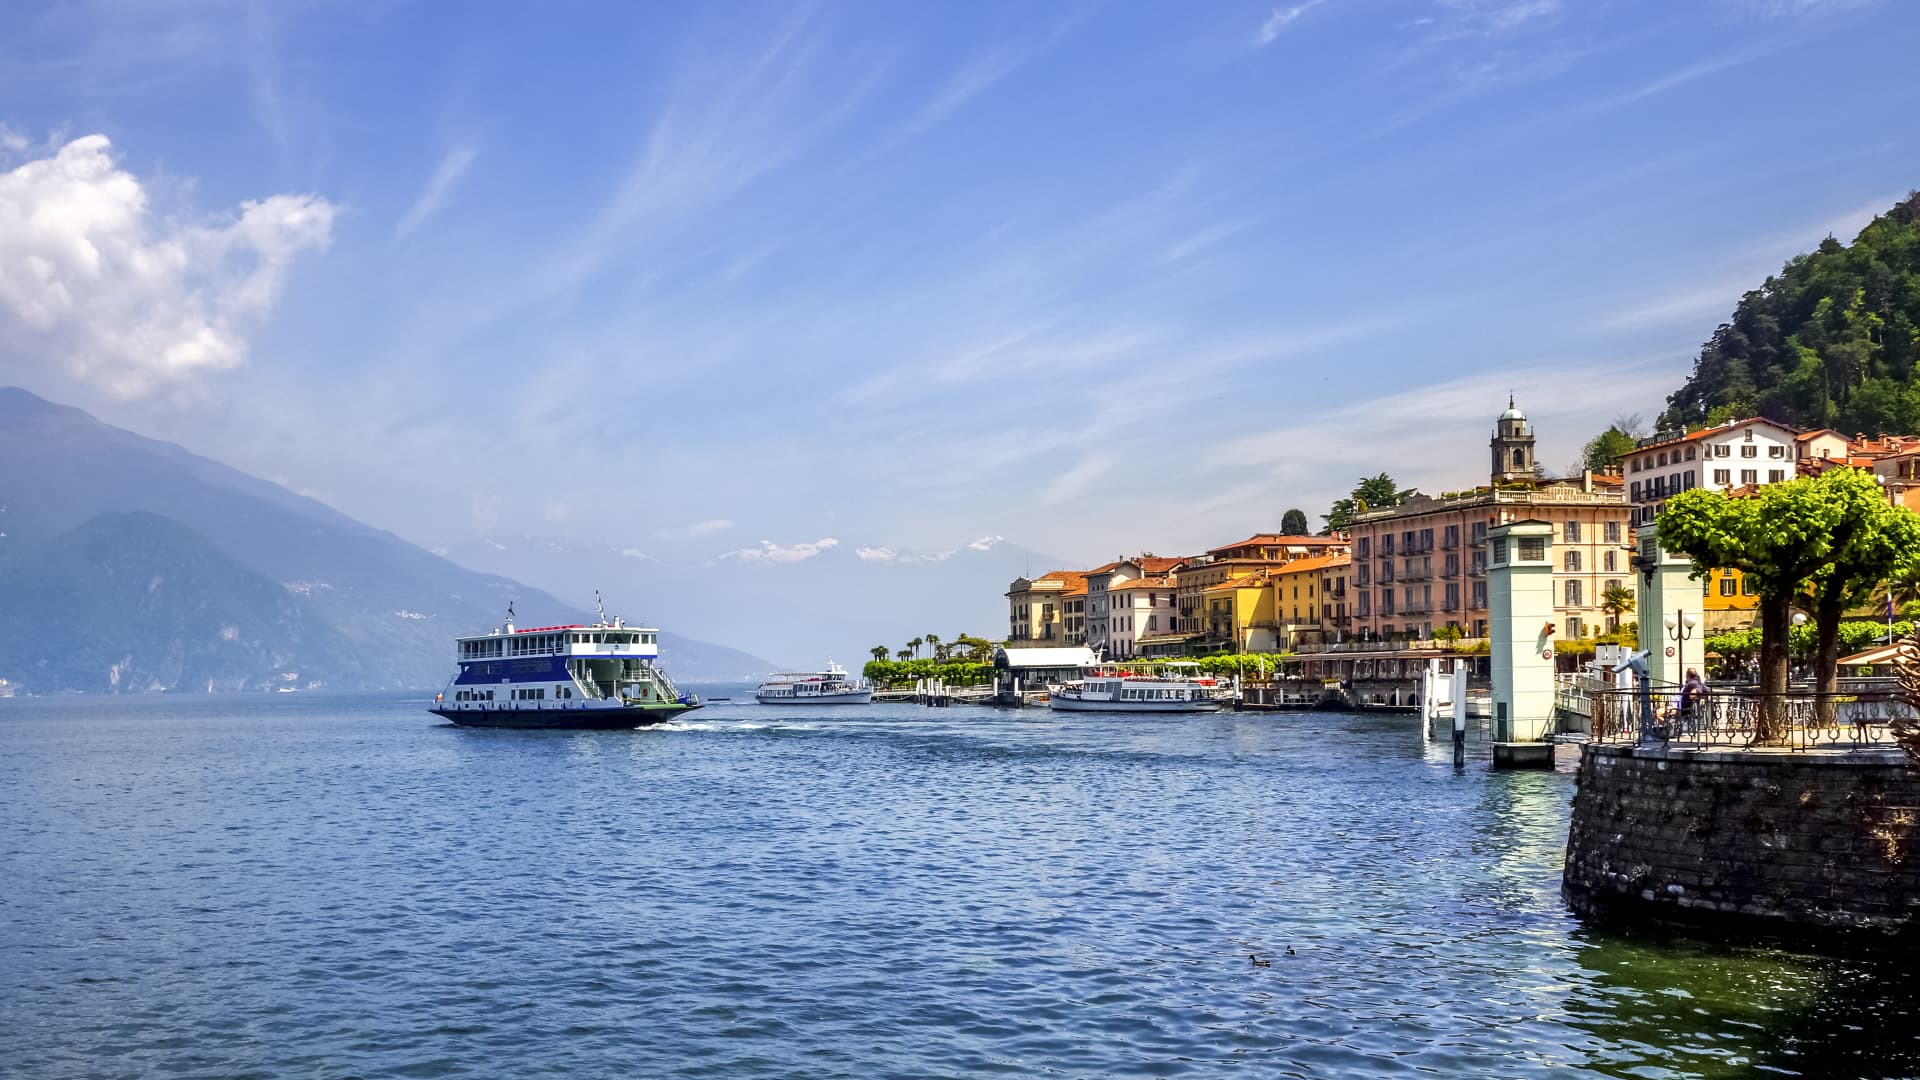 Amazon AI scammers blew millions on Lake Como wedding and cars, FTC alleges